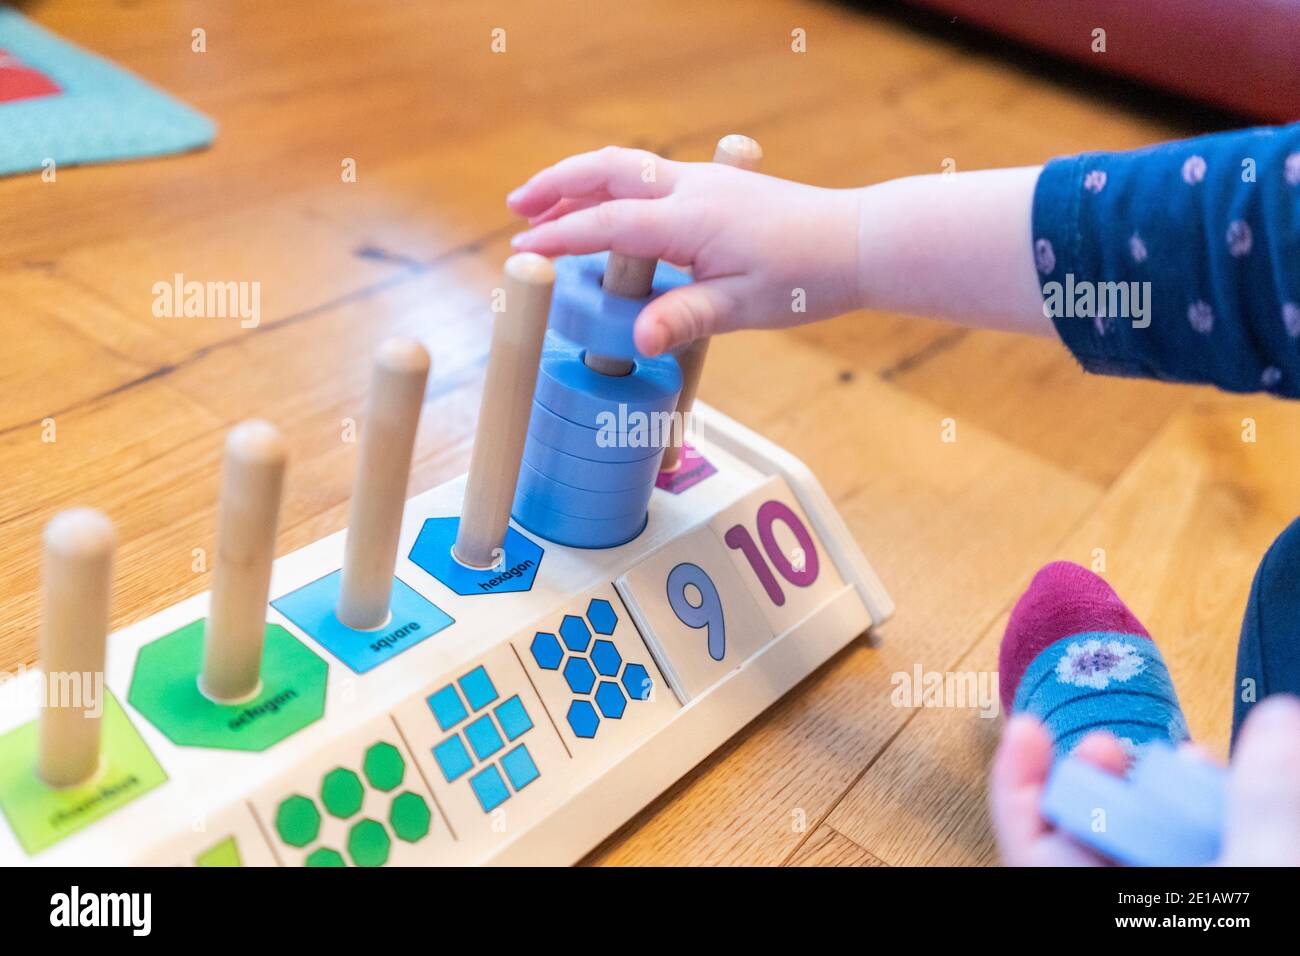 A young two year old child sitting on the floor and learning to count with a wooden counting shapes stacker educational toy Stock Photo